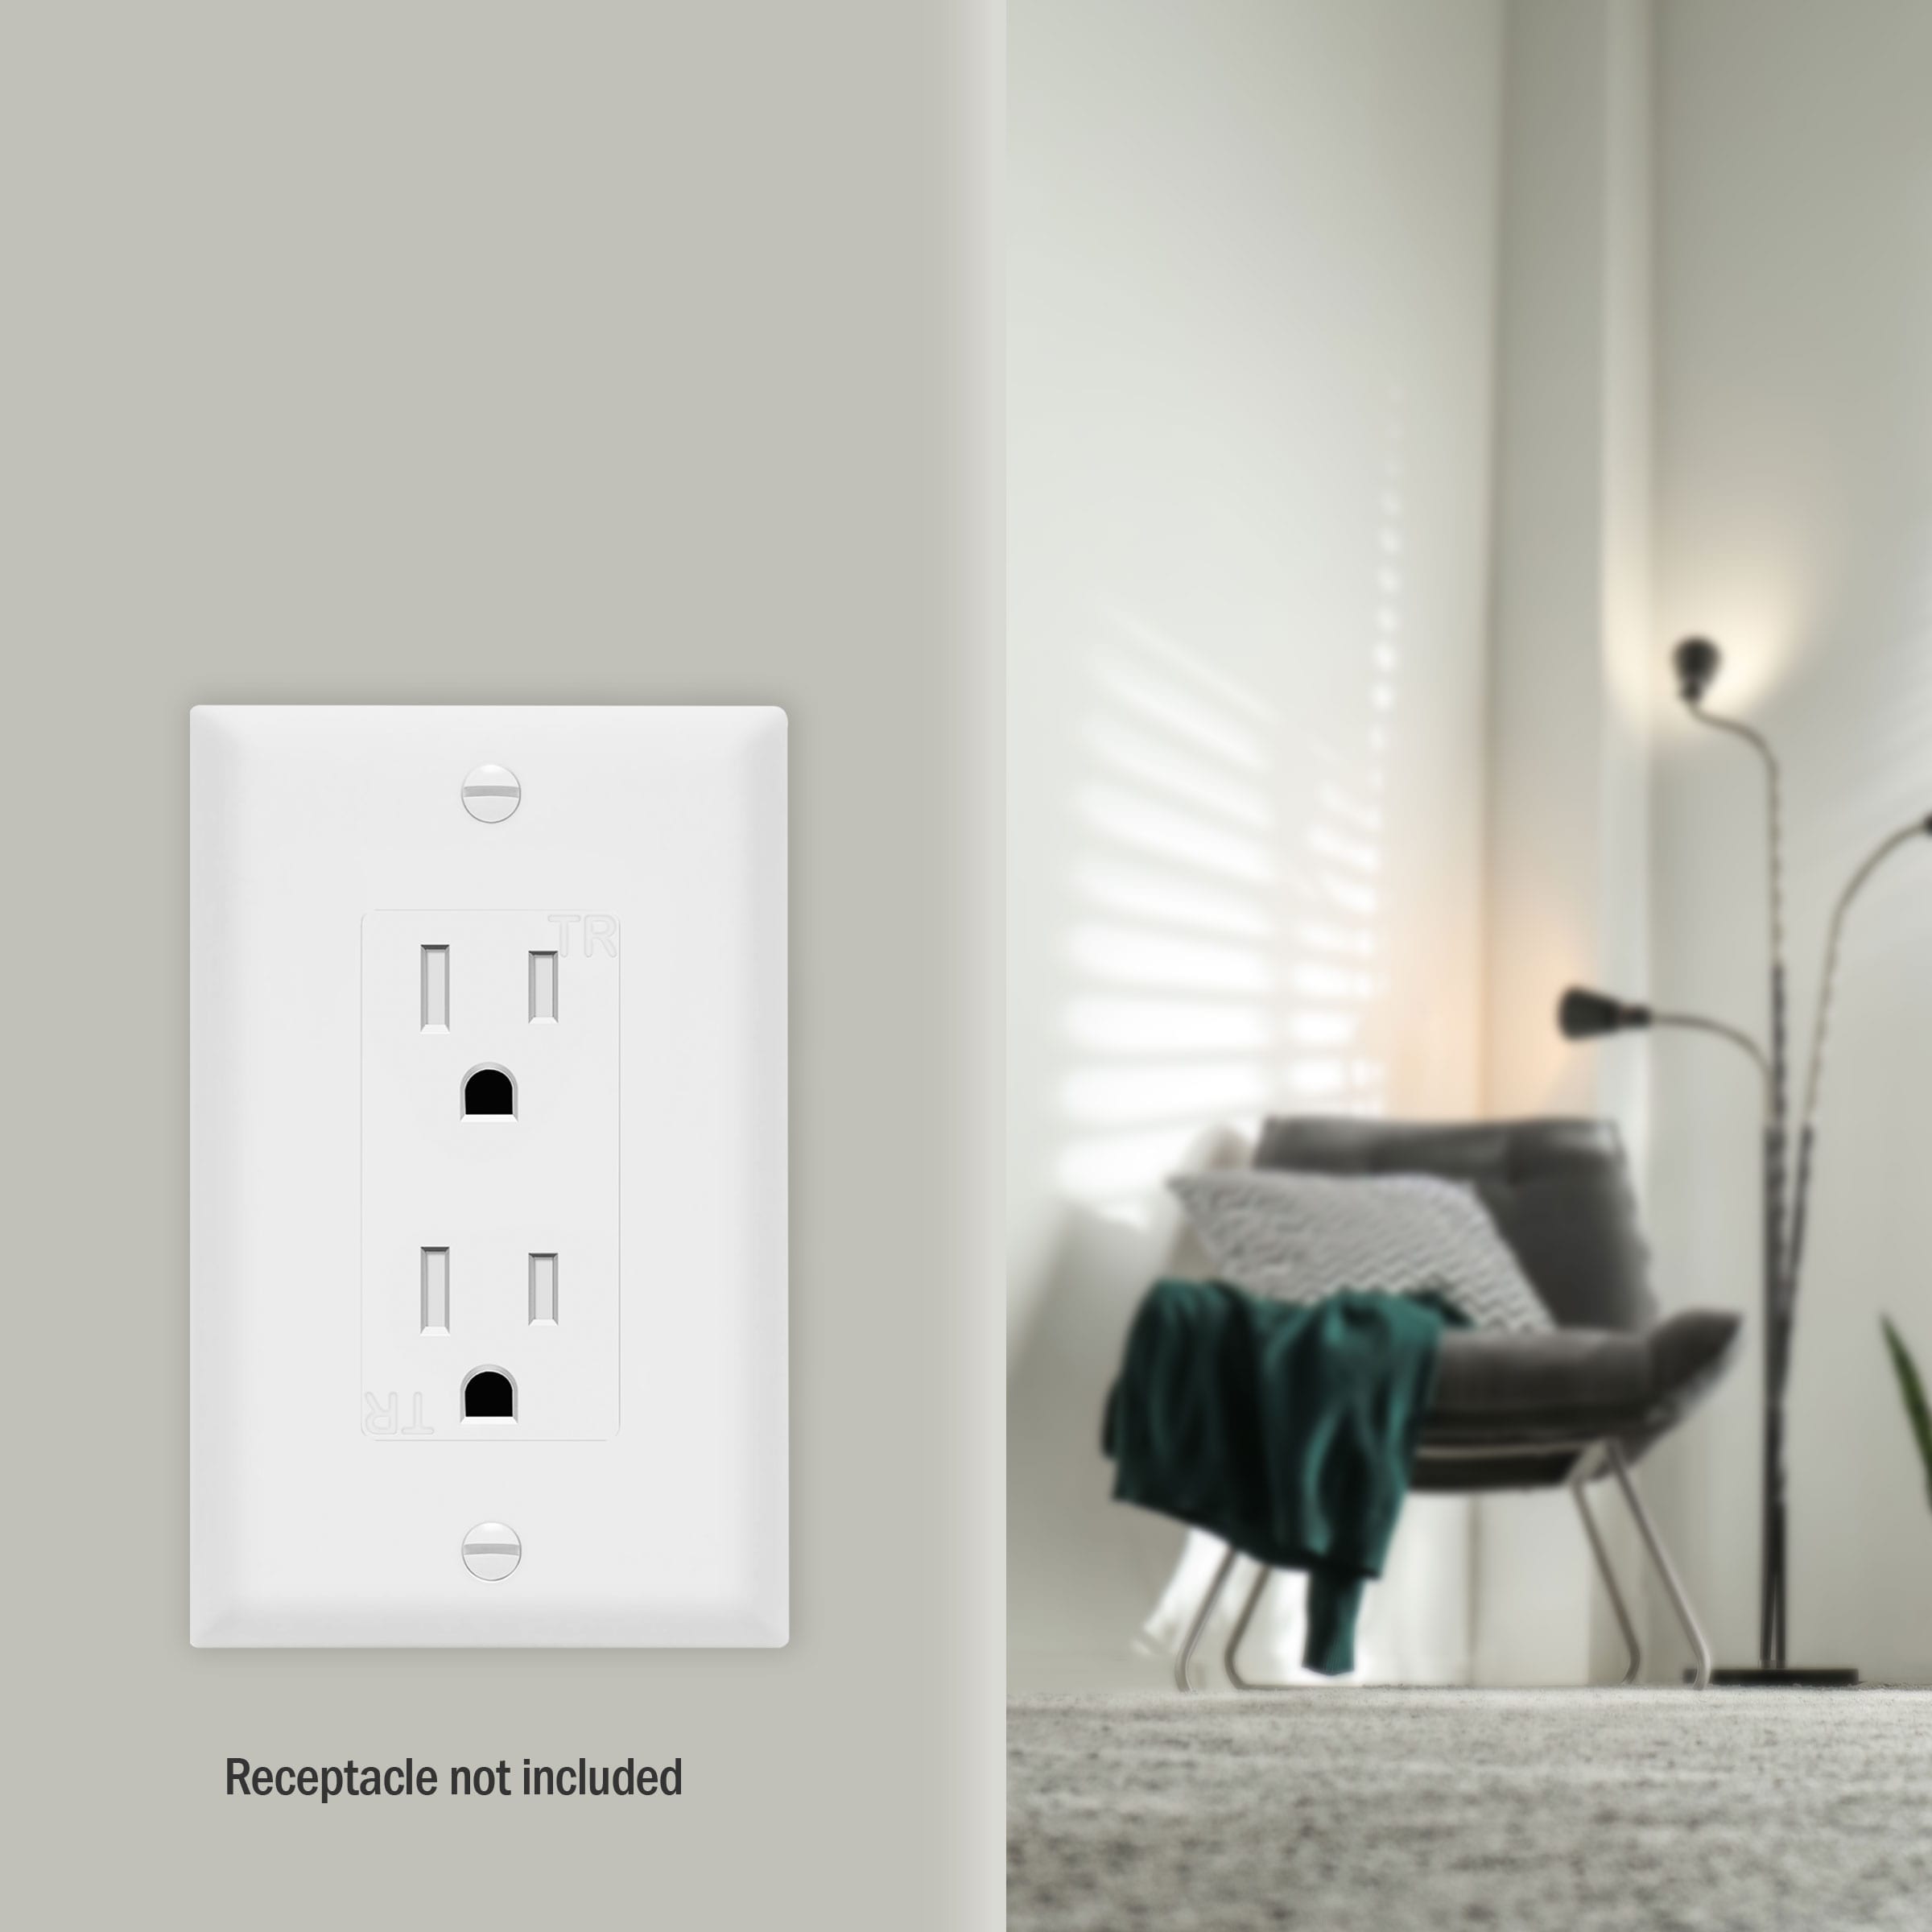 1-Gang Midsize Decorator/GFCI Outlet Wall Plate